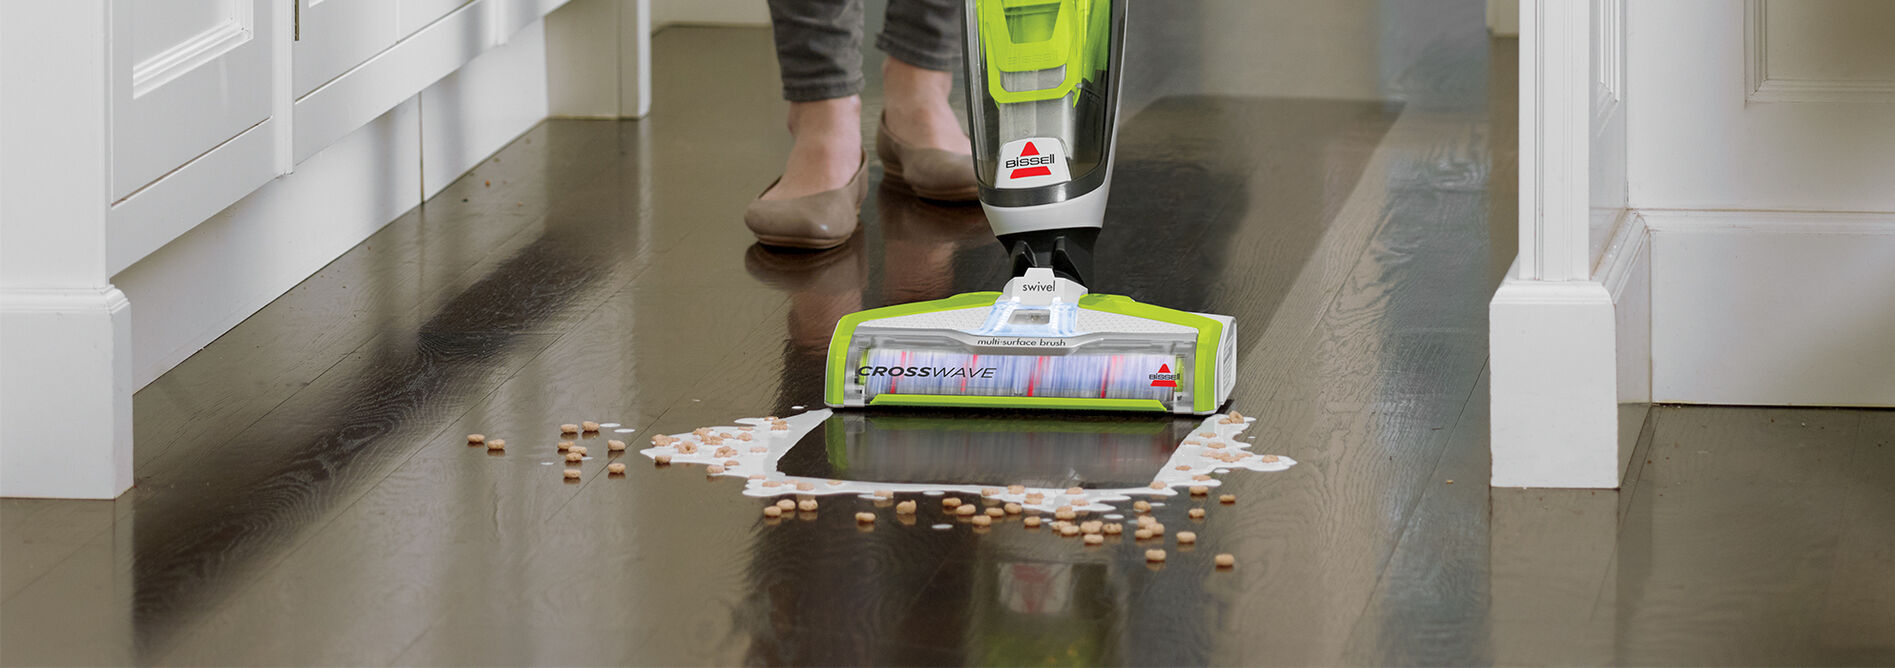 1785A Wet Vacuum Dry BISSELL® & Crosswave® Cleaner